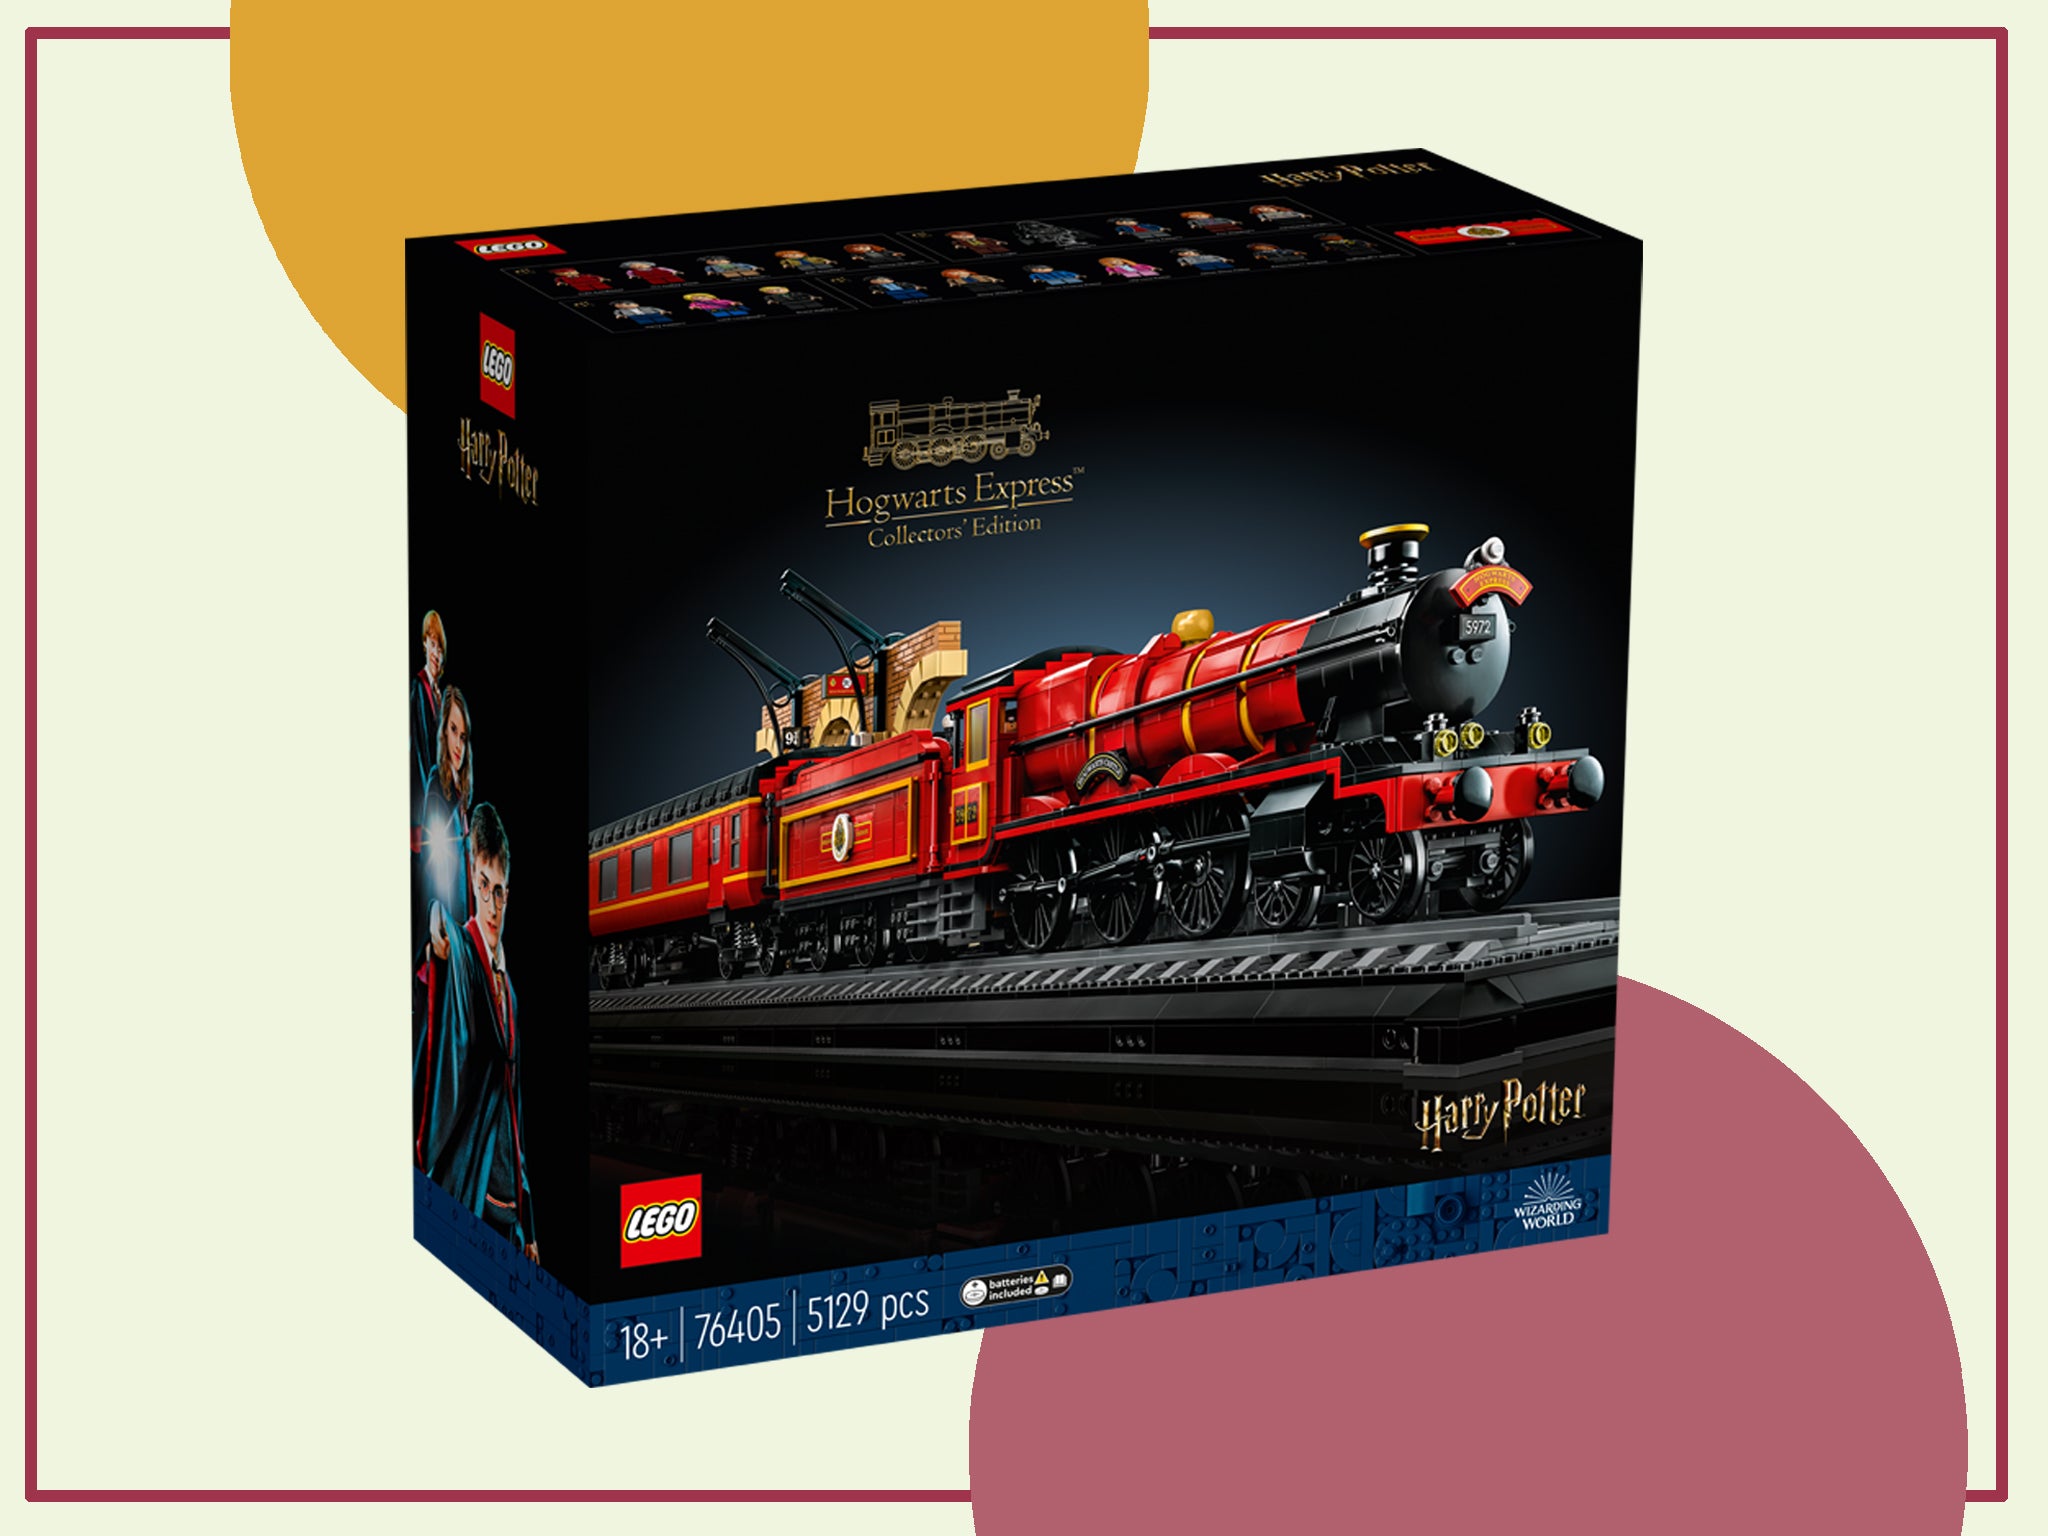 It features 20 minifigures from the films